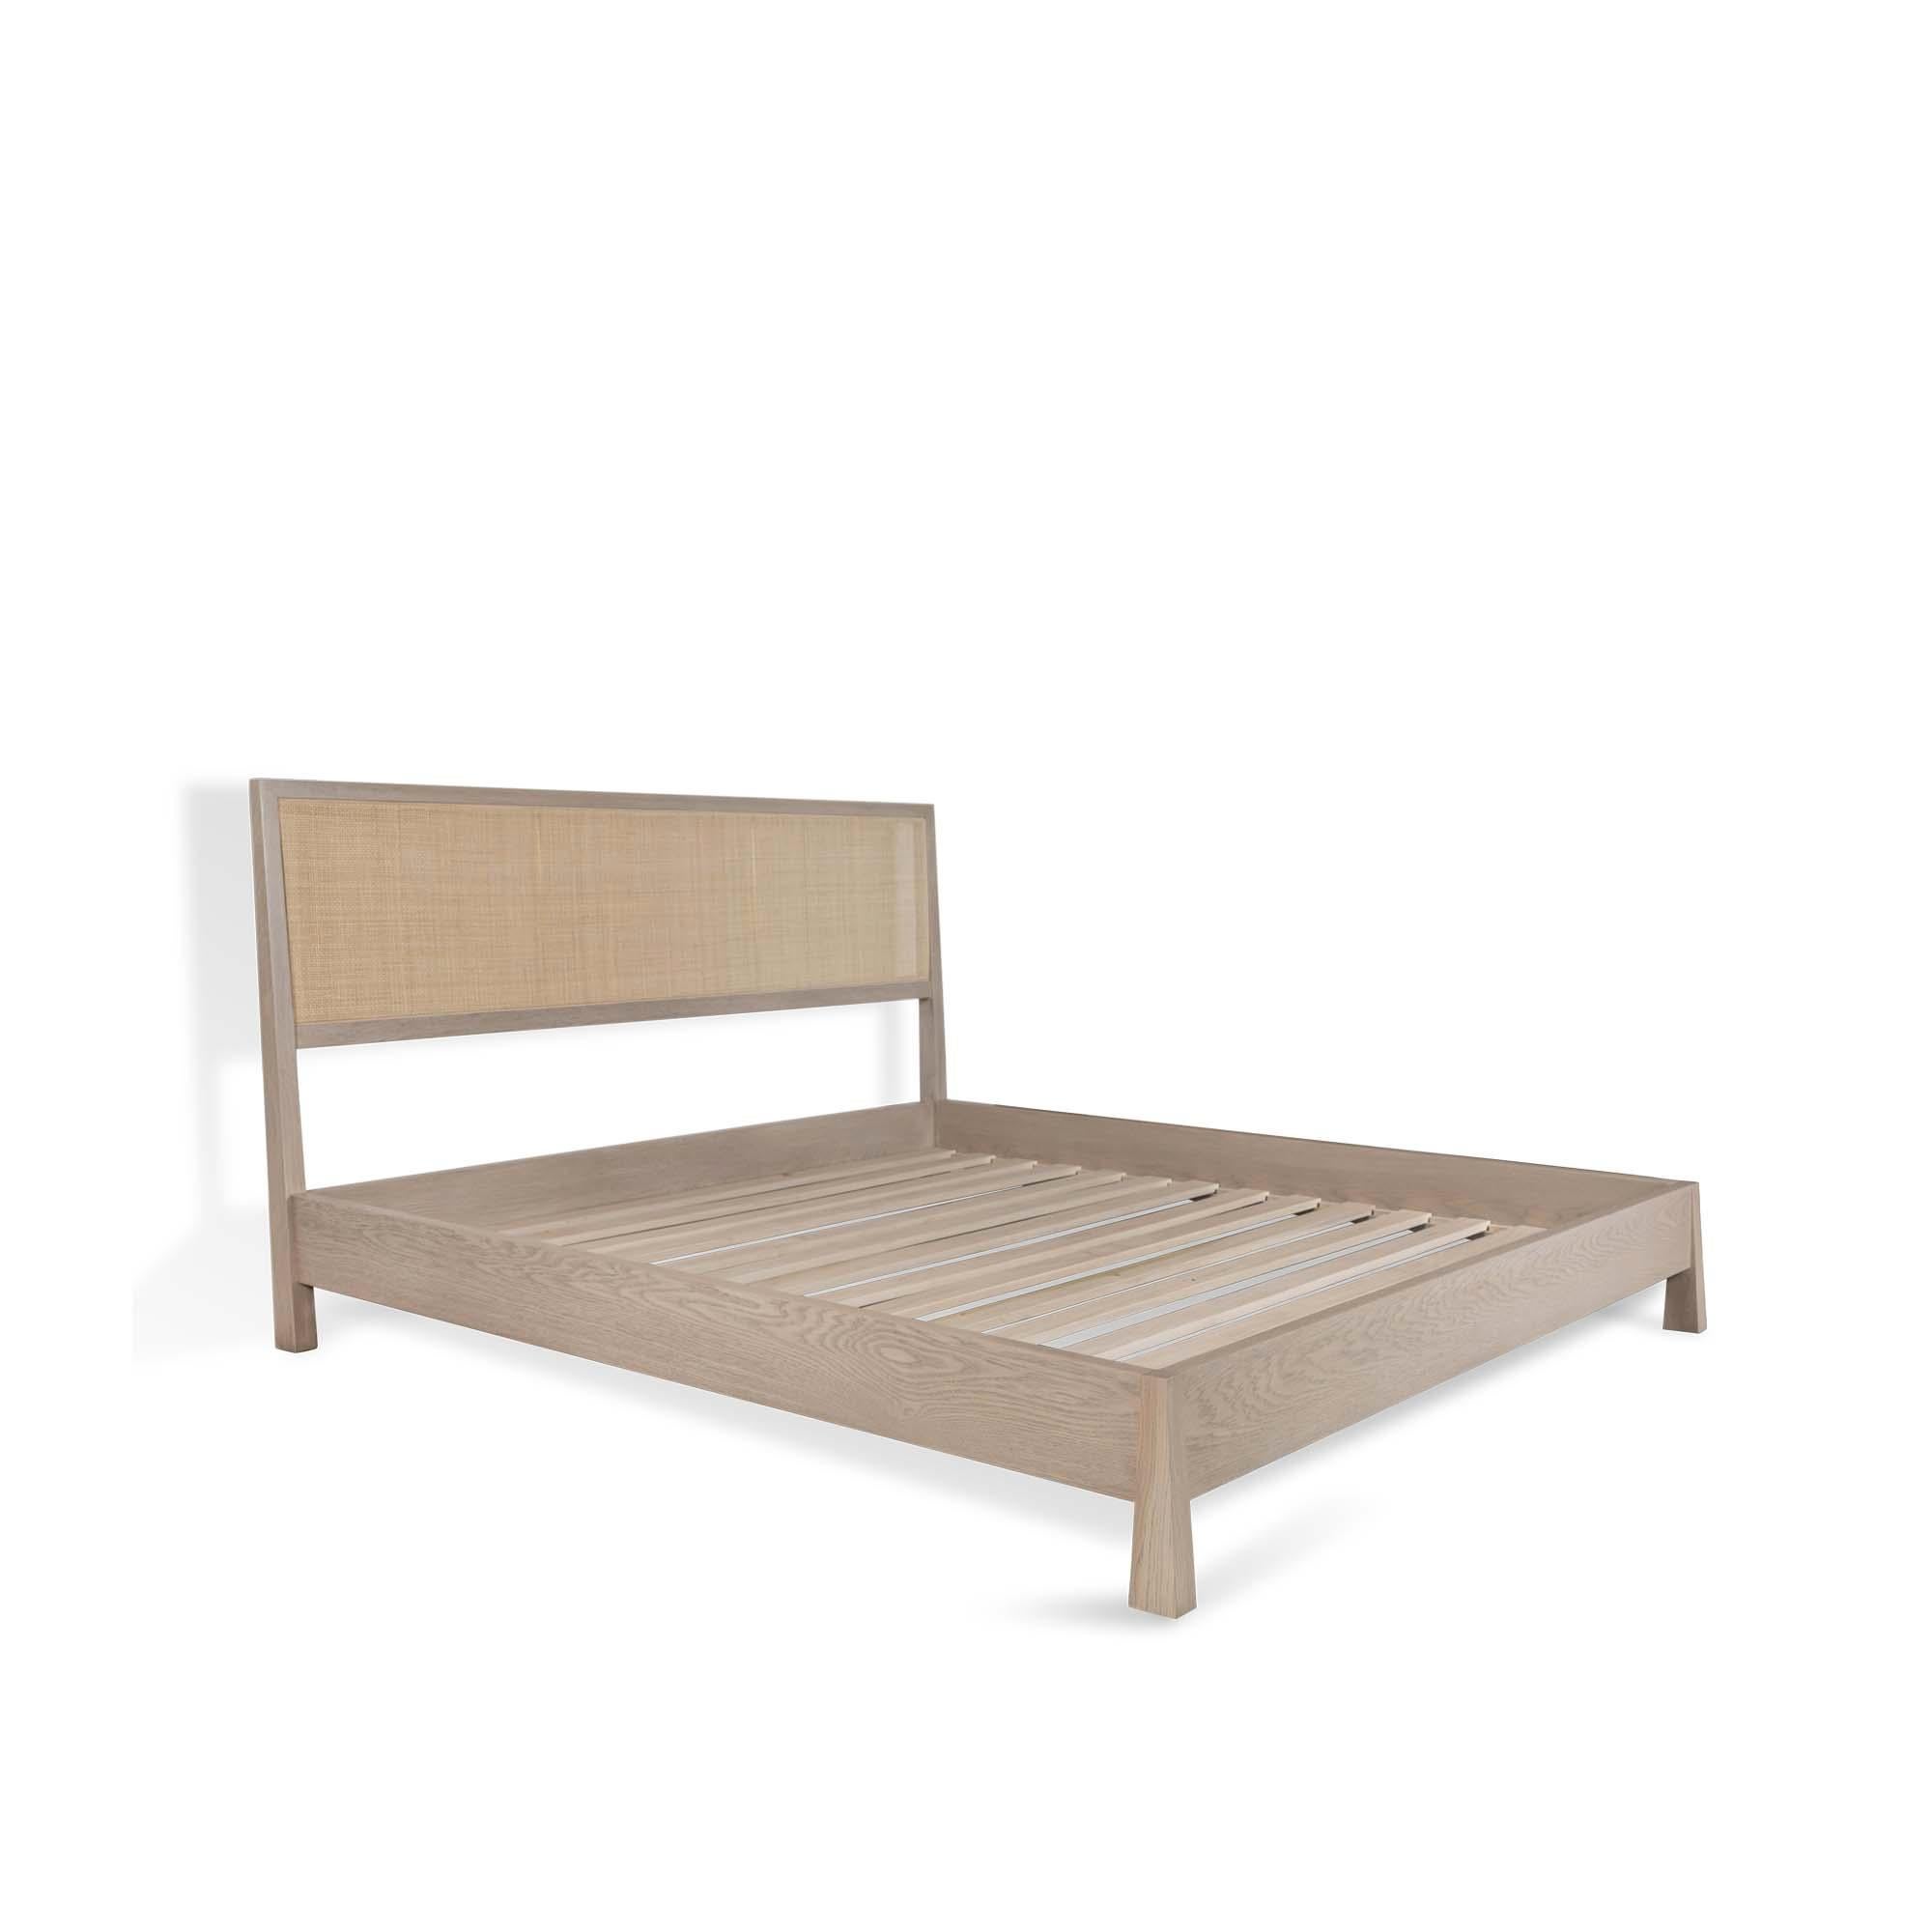 The caned bed is a solid wood framed bed that can be made in either white oak or American walnut. The piece can feature a headboard and footboard or just a headboard made with natural cane inset panels and brass stretchers. Slats are